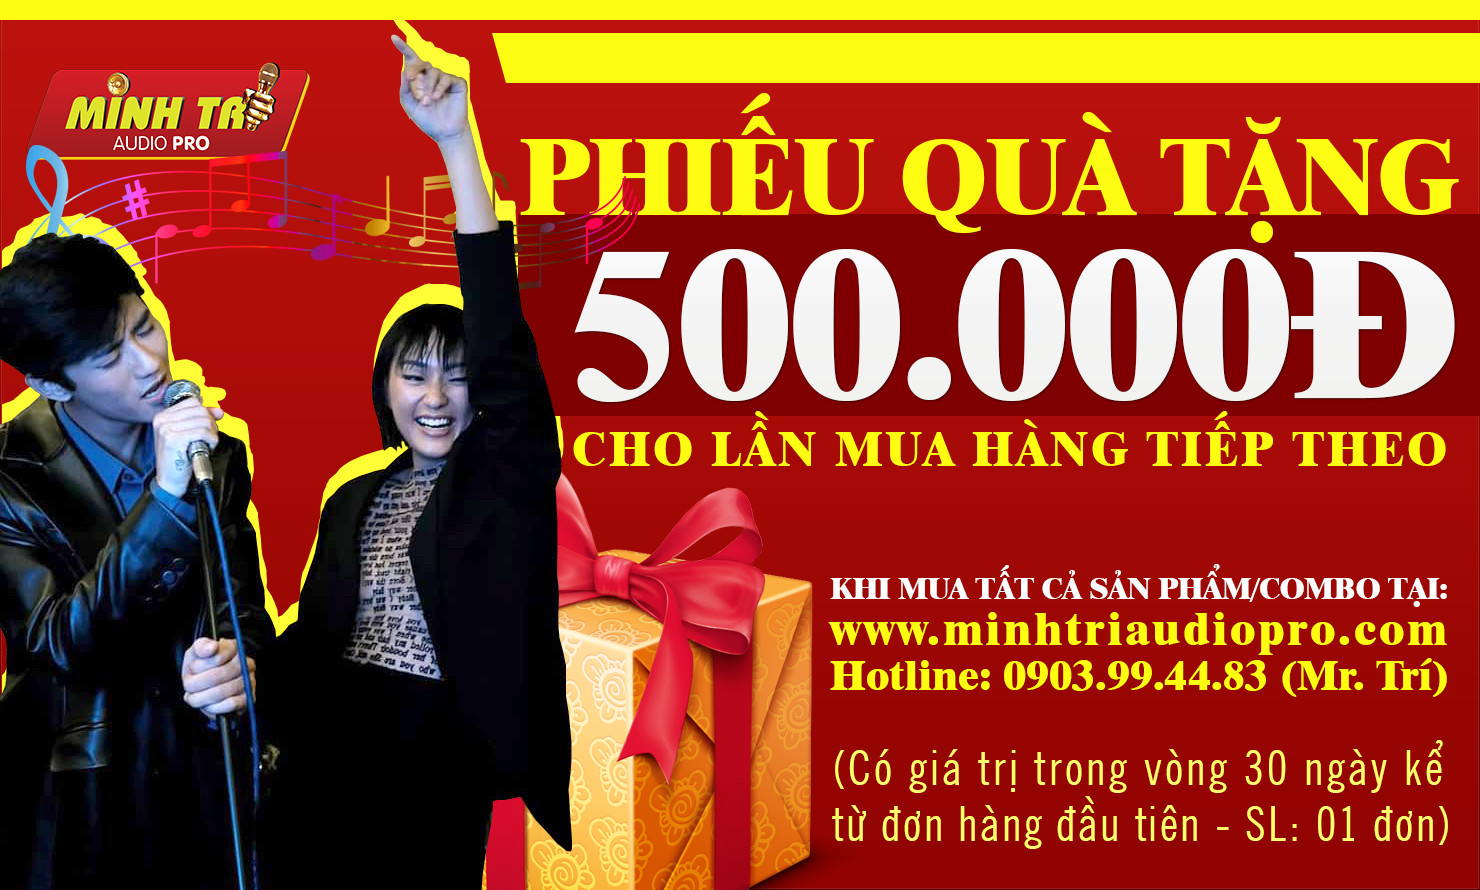 MINH TRI AUDIO - PROMOTION PROGRAM TO GIVE BUYER Vouchers for Loyal Customers